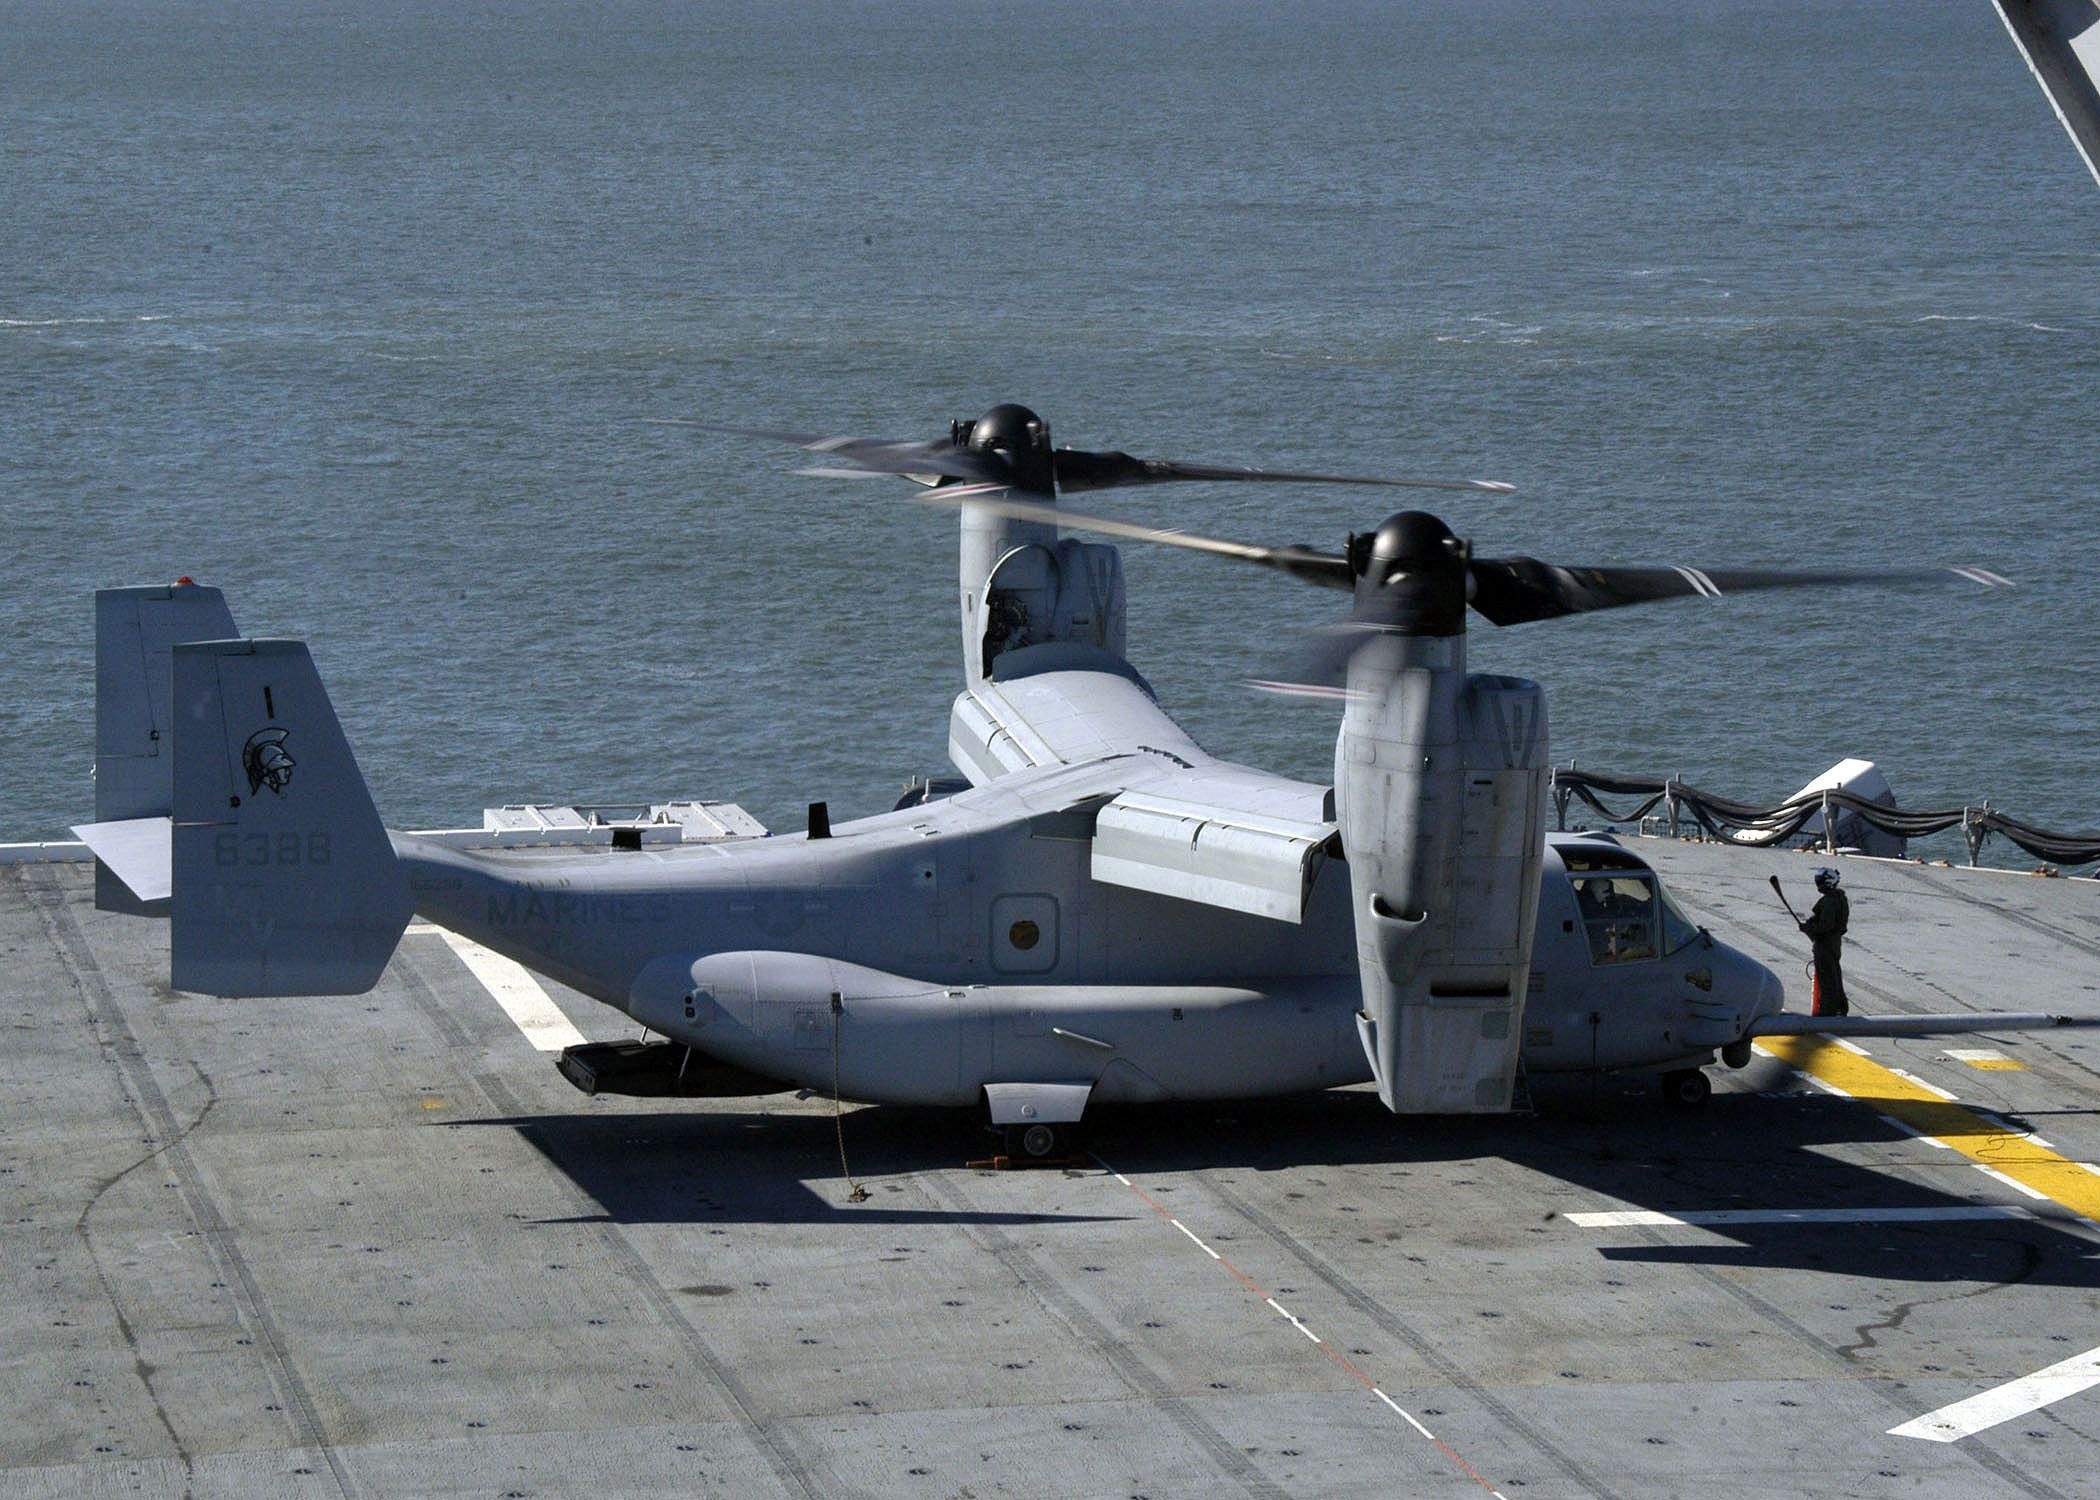 V-22 Osprey, Military aircraft, Army and Air Force teamwork, Mission success, 2100x1500 HD Desktop